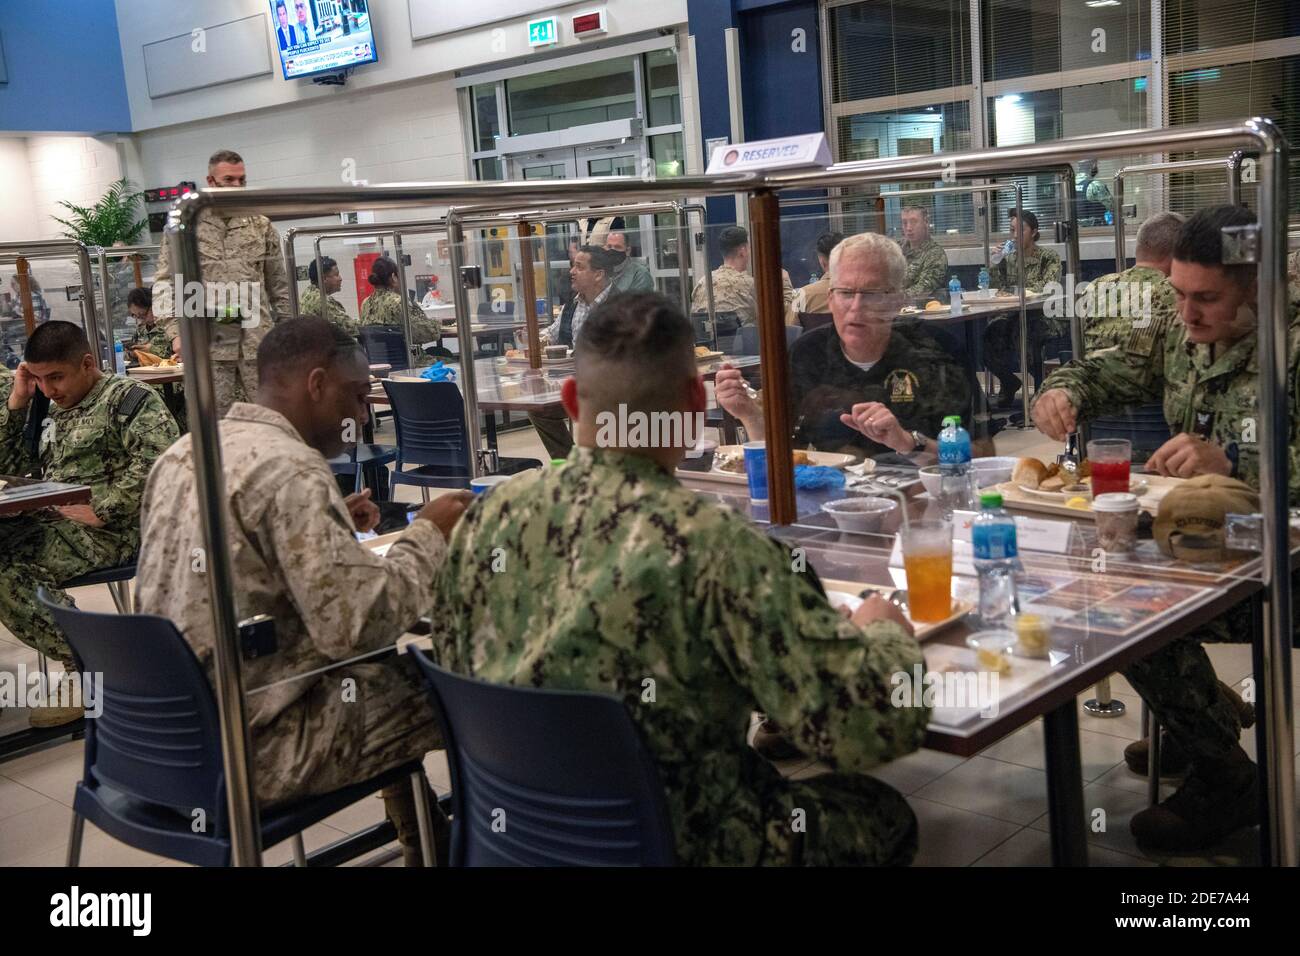 U.S. Acting Secretary of Defense Christopher Miller joins service members for Thanksgiving dinner at Naval Support Activity Bahrain November 25, 2020 in Manama, Bahrain. Stock Photo